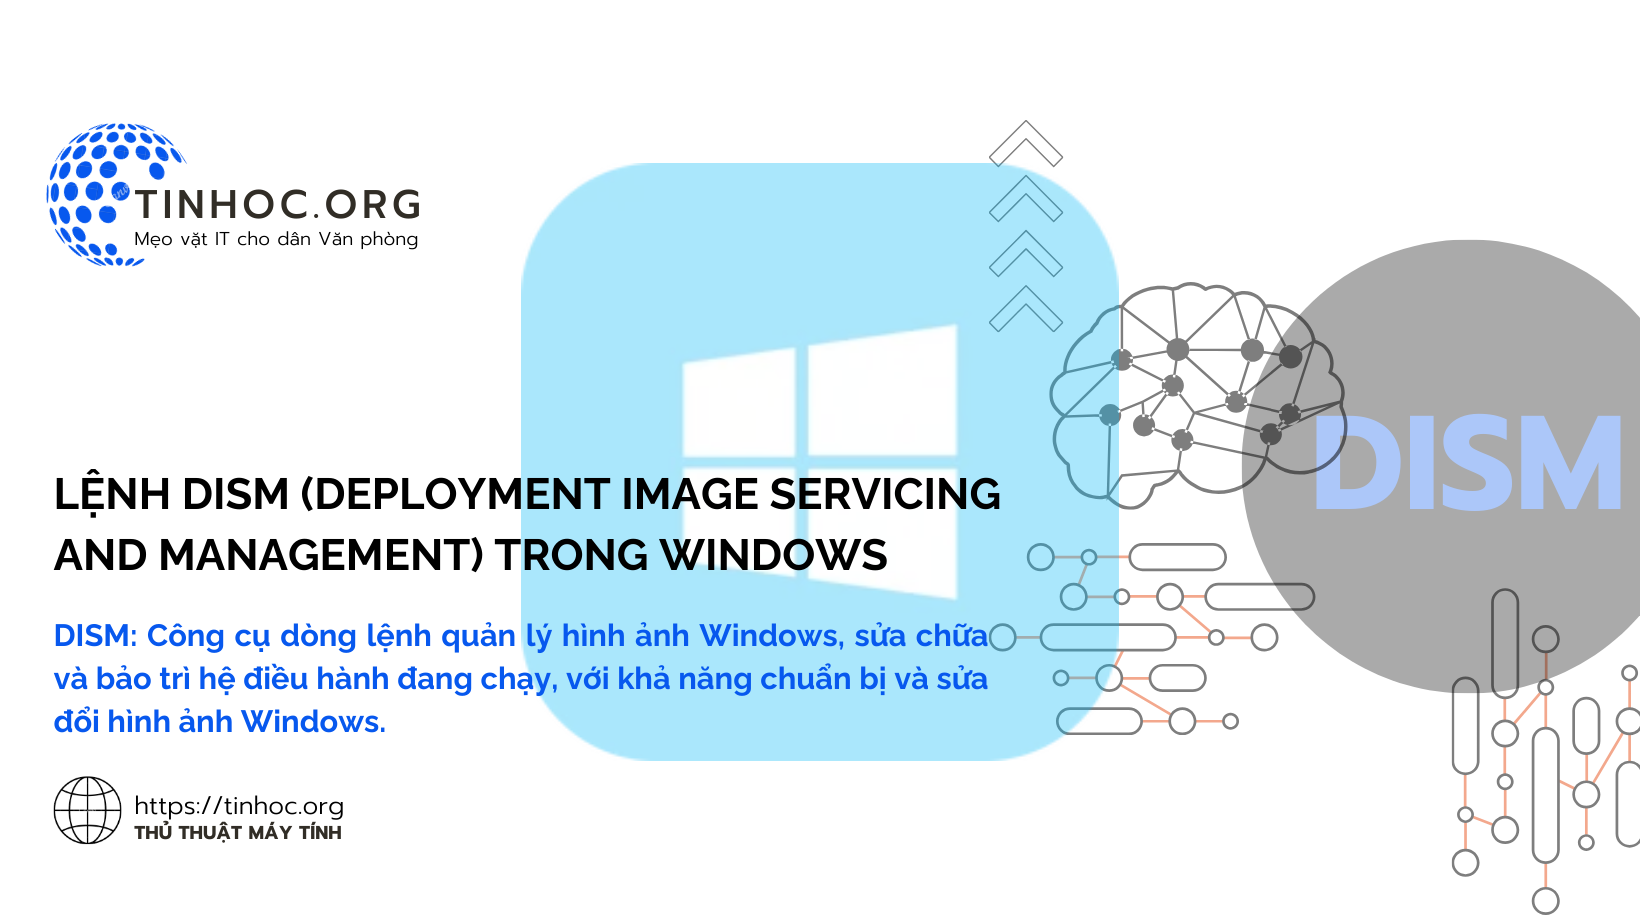 Lệnh DISM (Deployment Image Servicing and Management) trong Windows